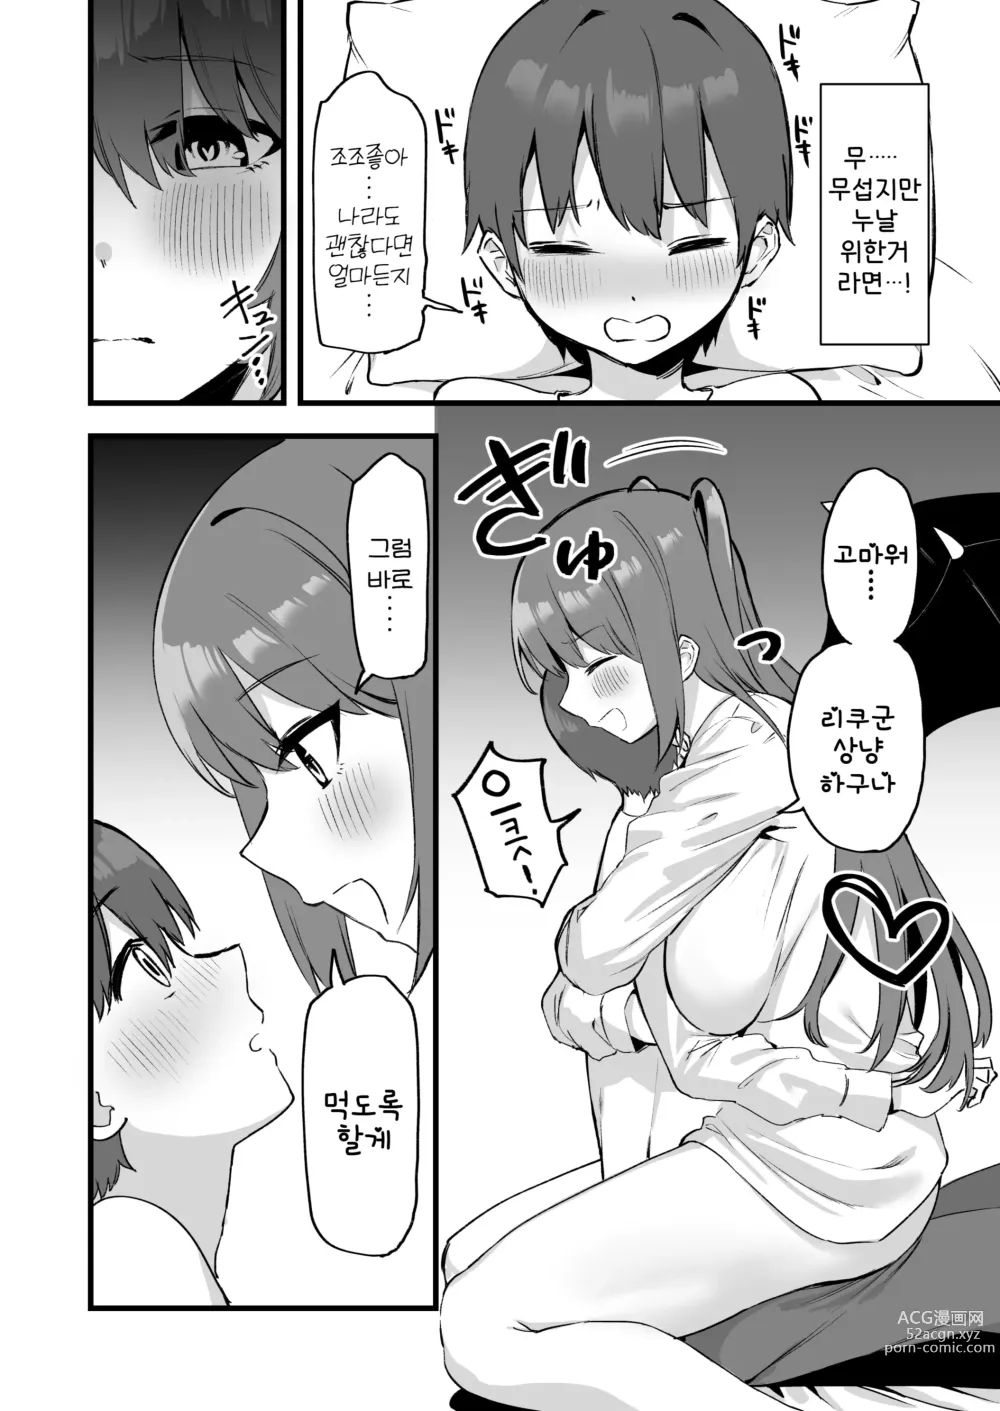 Page 8 of doujinshi 누나는 서큐버스!?